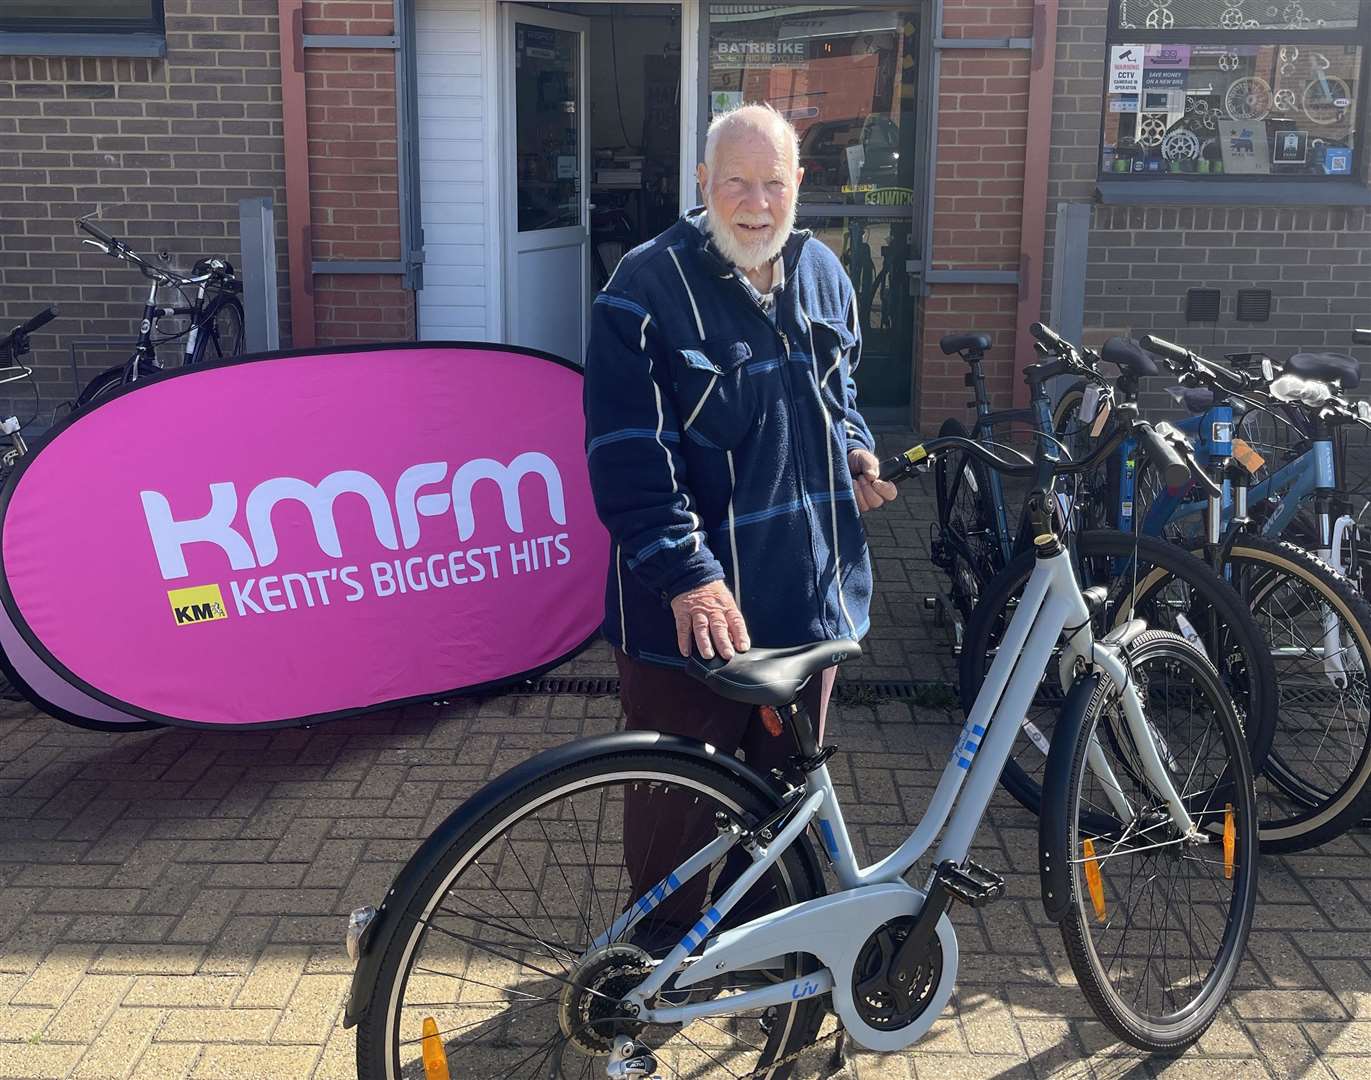 Eighty-eight year old Tony Fagg, from Ashford, was so happy to receive a new bike so he could continue his daily paper rounds